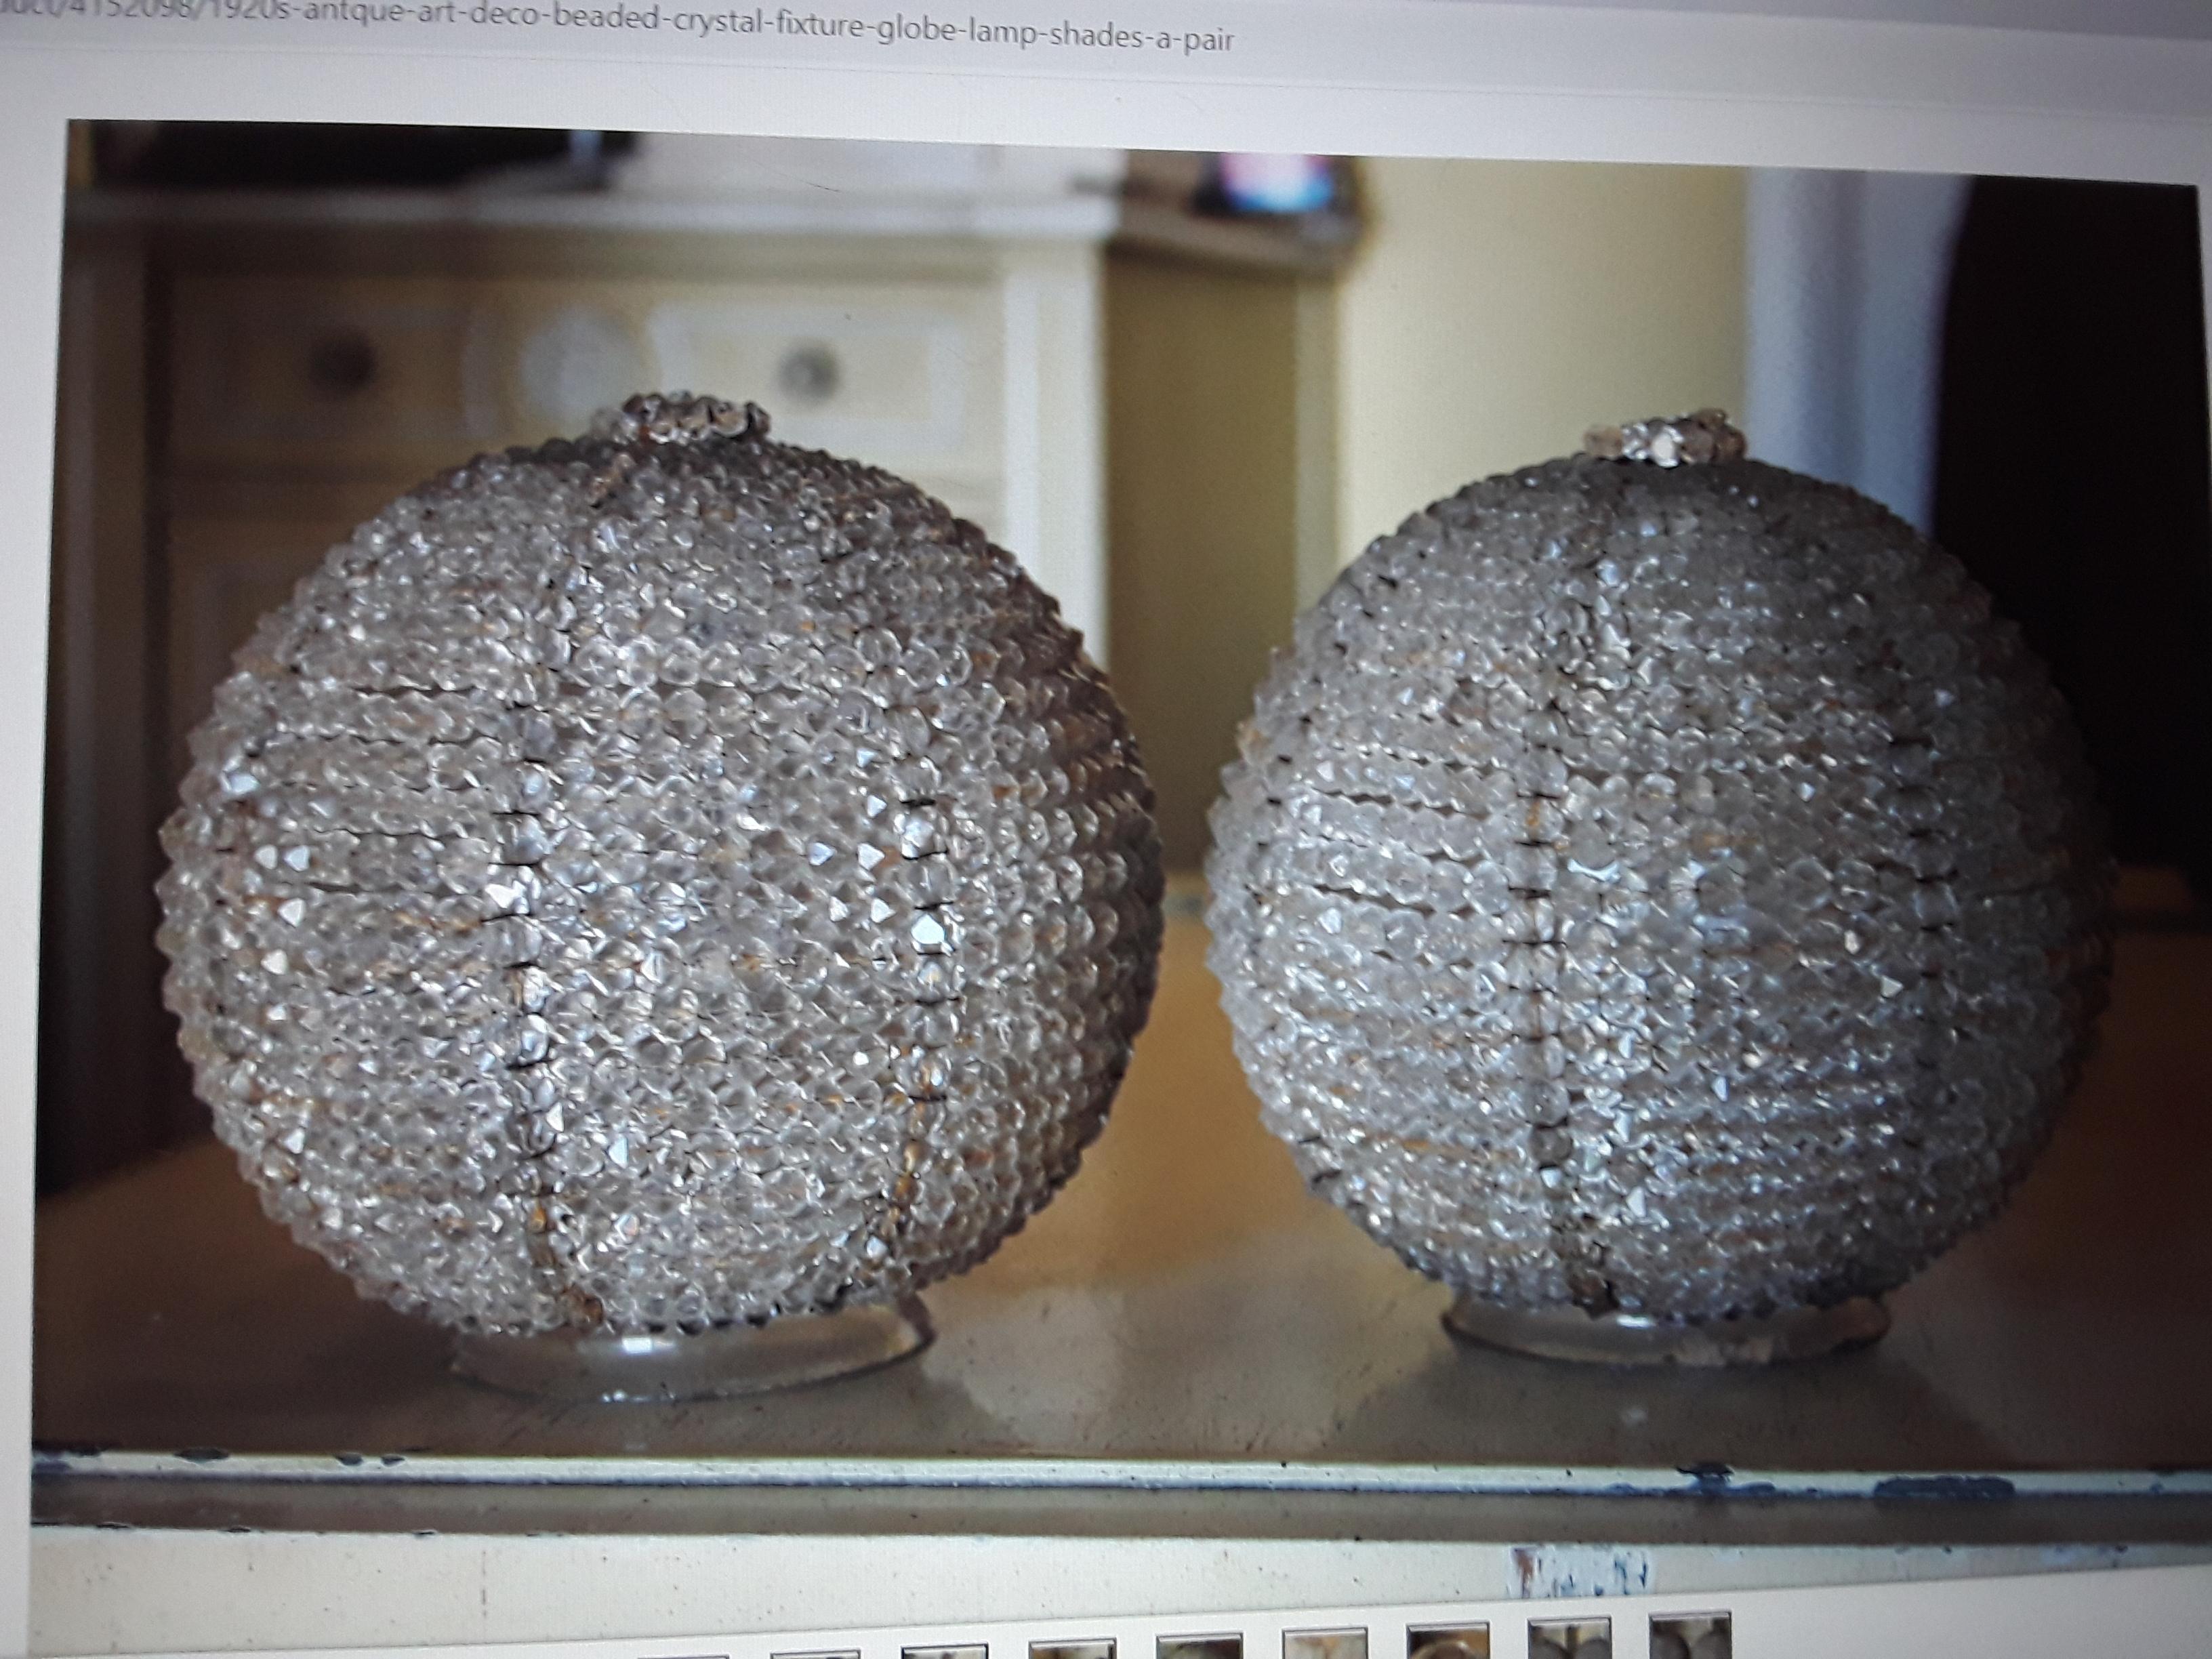 Set of 2 1920's Antique Art Deco Pefectly Crystal Beaded Lamp Shades - Large For Sale 4